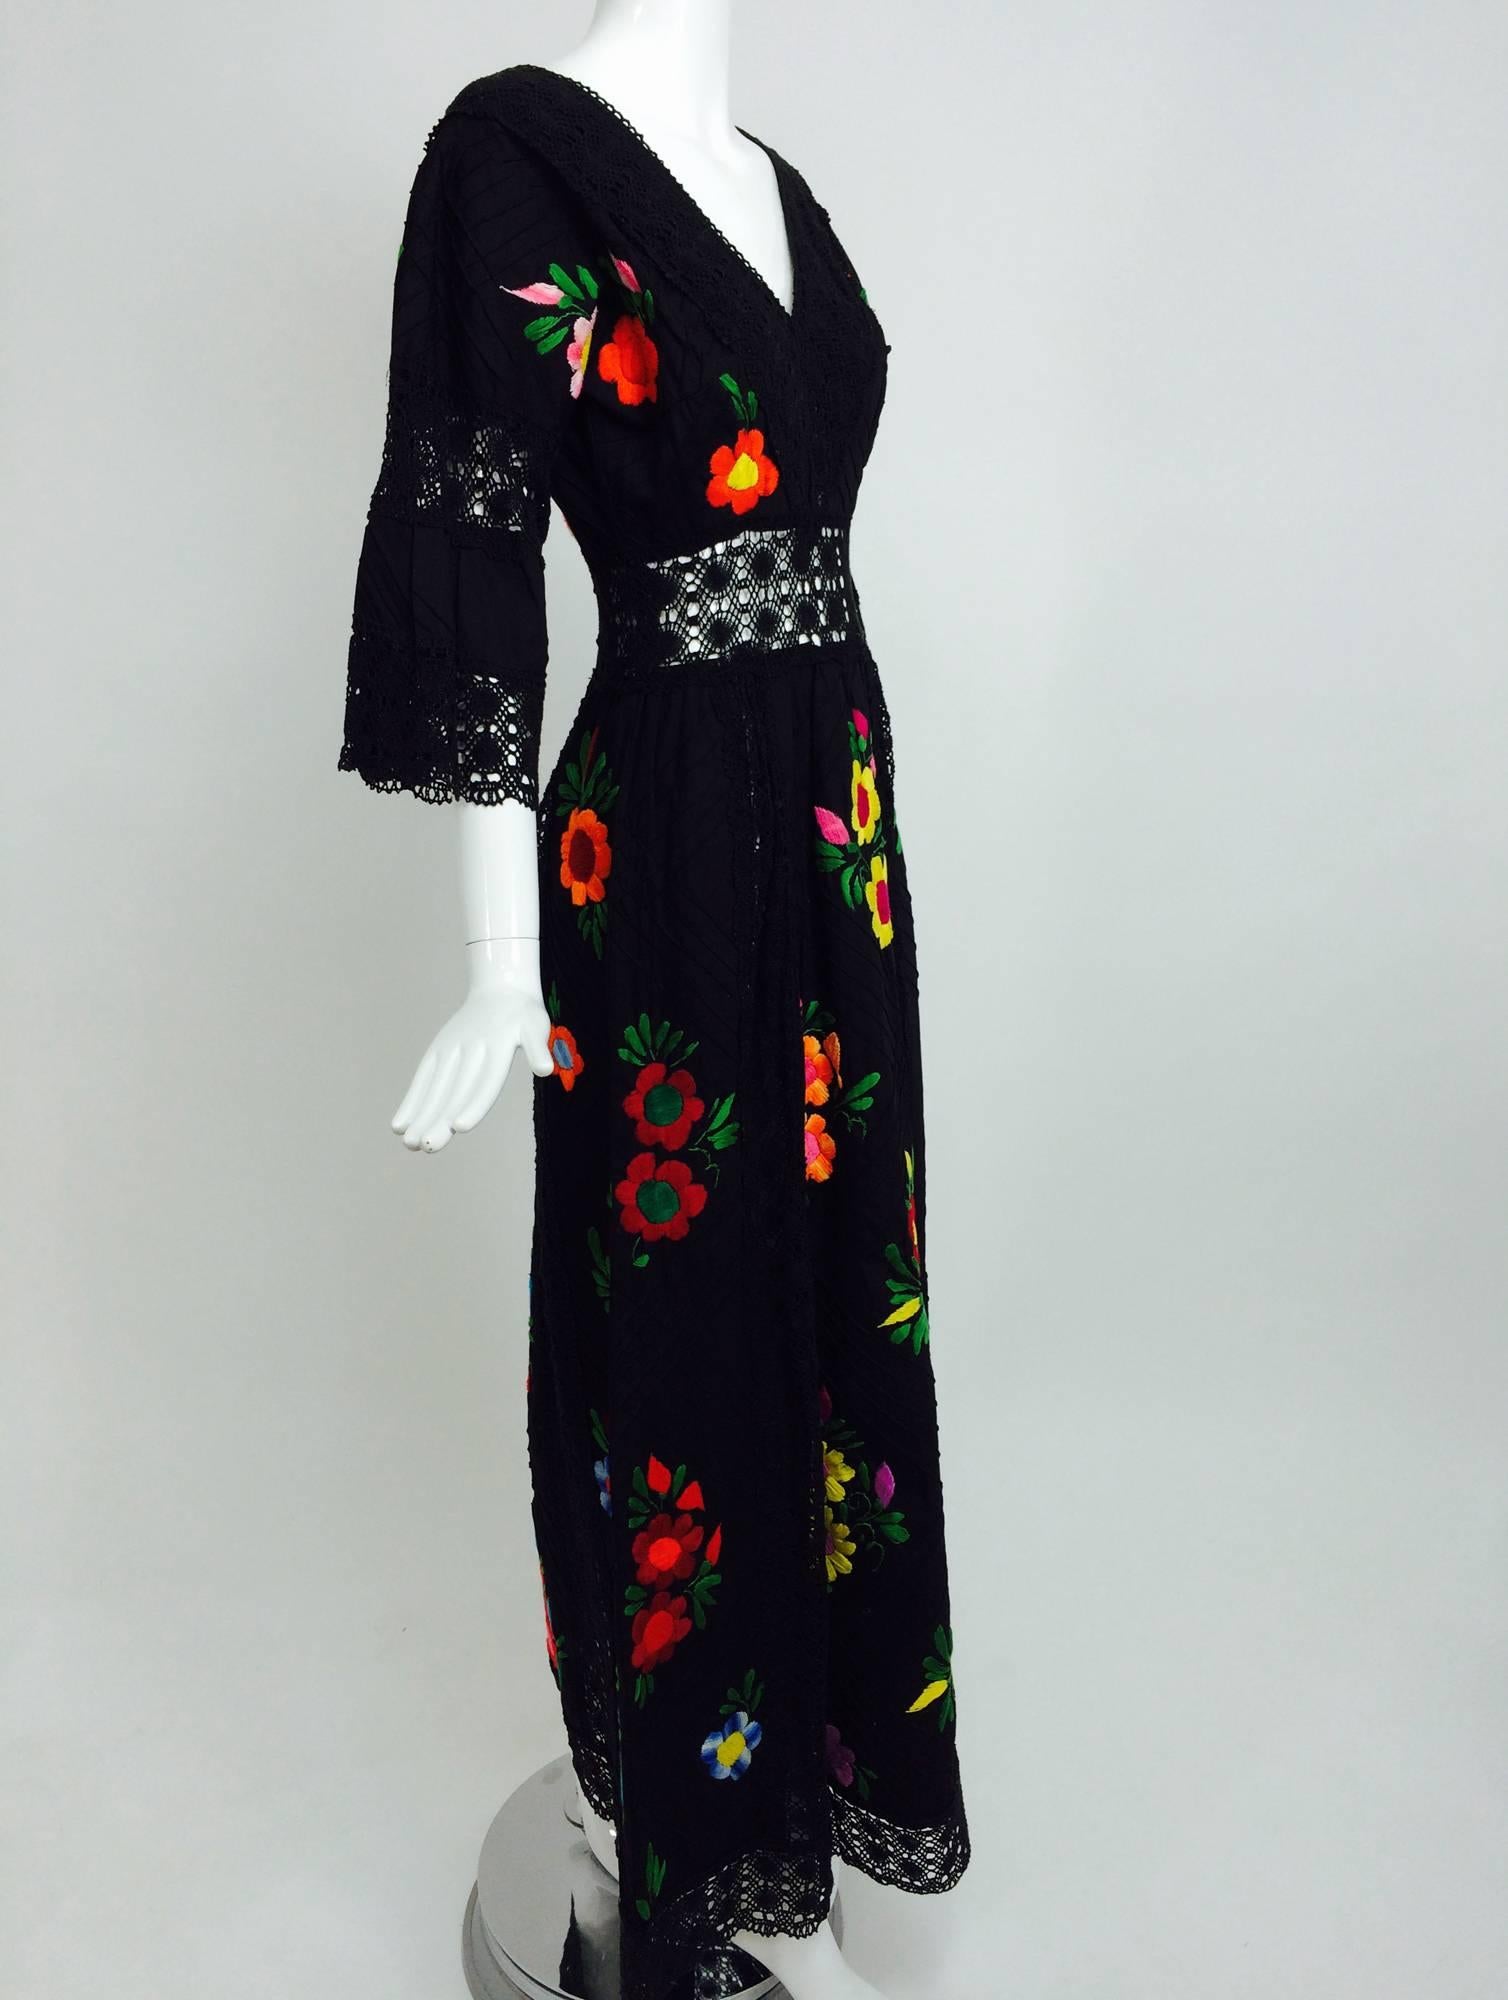 Vintage colourfully embroidered black cotton & lace Mexican maxi dress 1970s...Black tucked cotton dress with bright cotton embroidered flowers scattered throughout...Plunge neckline trimmed in wide black crochet lace...The dress has a wide band of